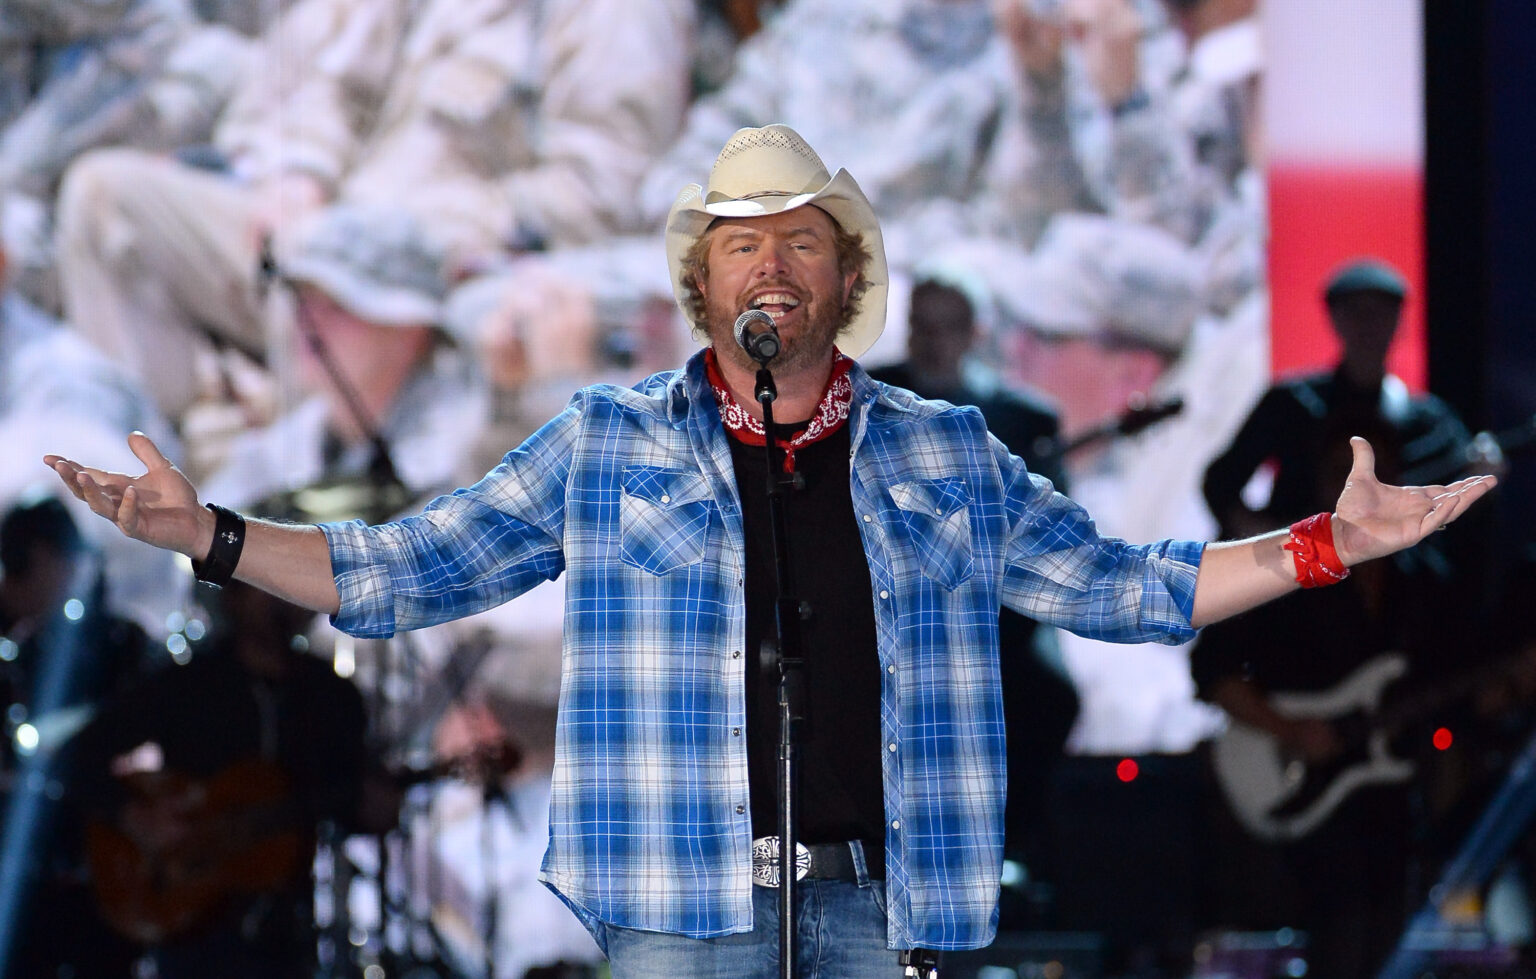 RIP, Toby Keith